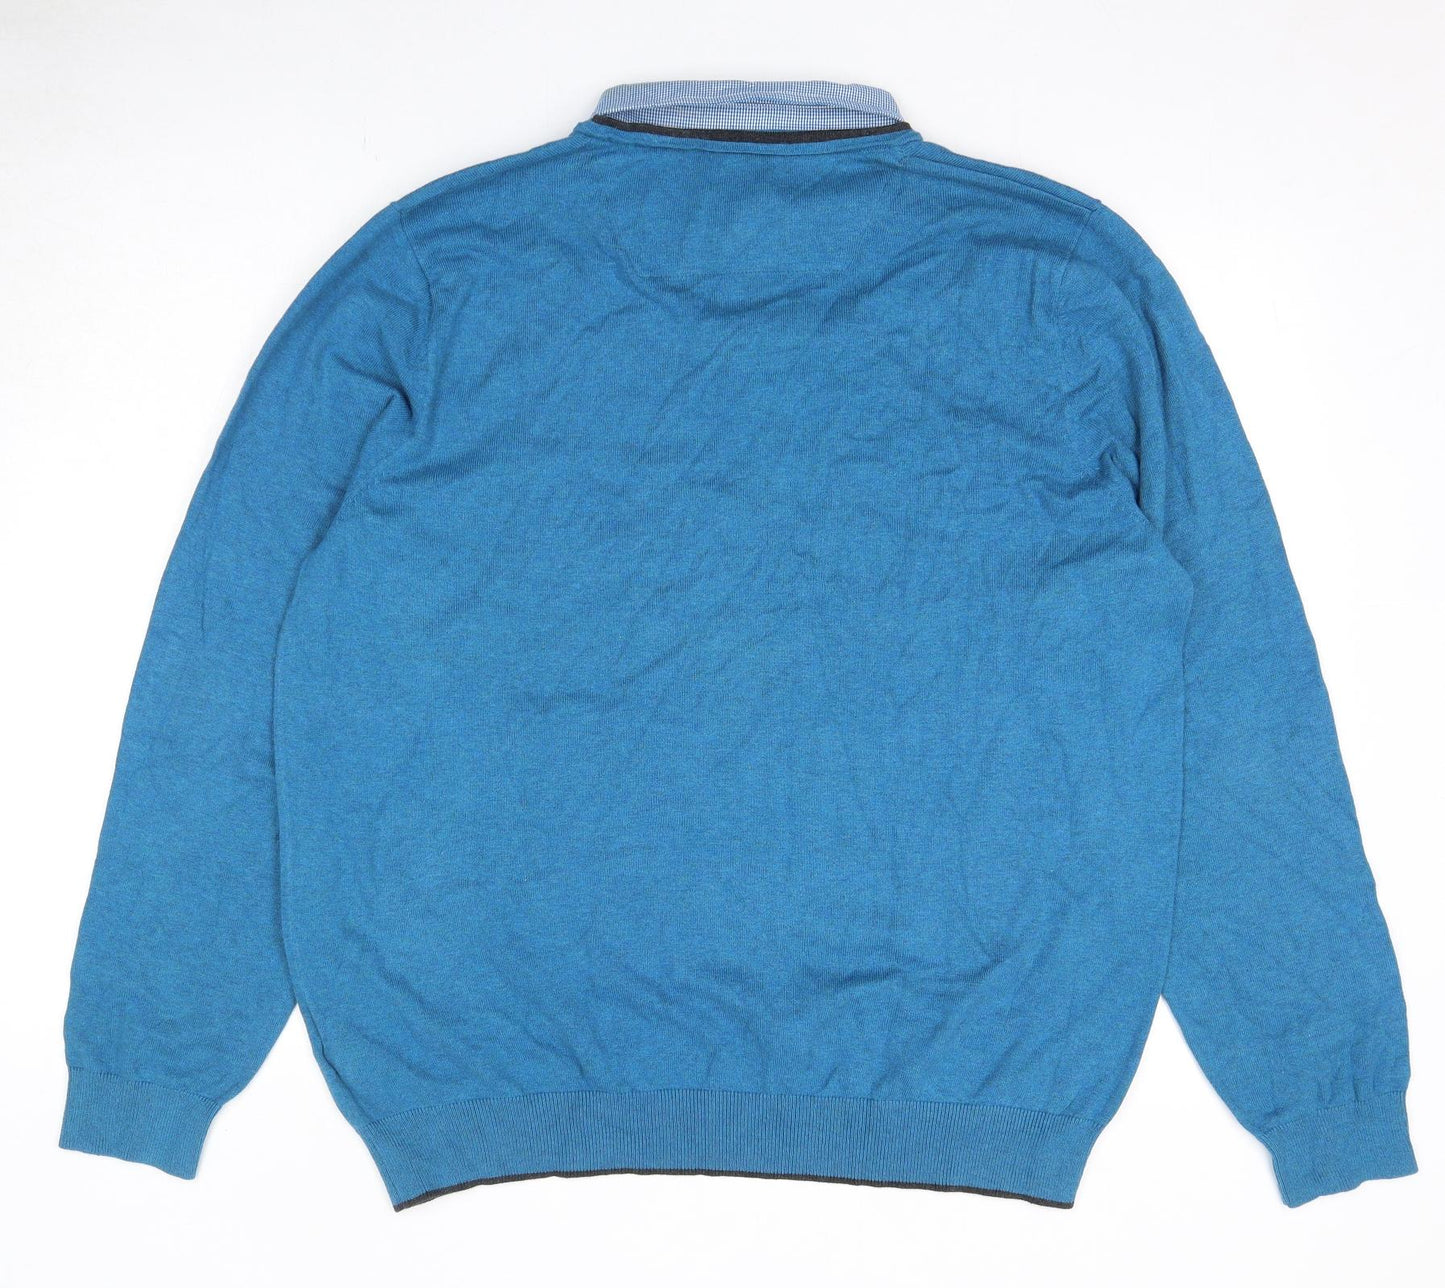 Marks and Spencer Mens Blue Collared Cotton Pullover Jumper Size XL Long Sleeve - Shirt Insert